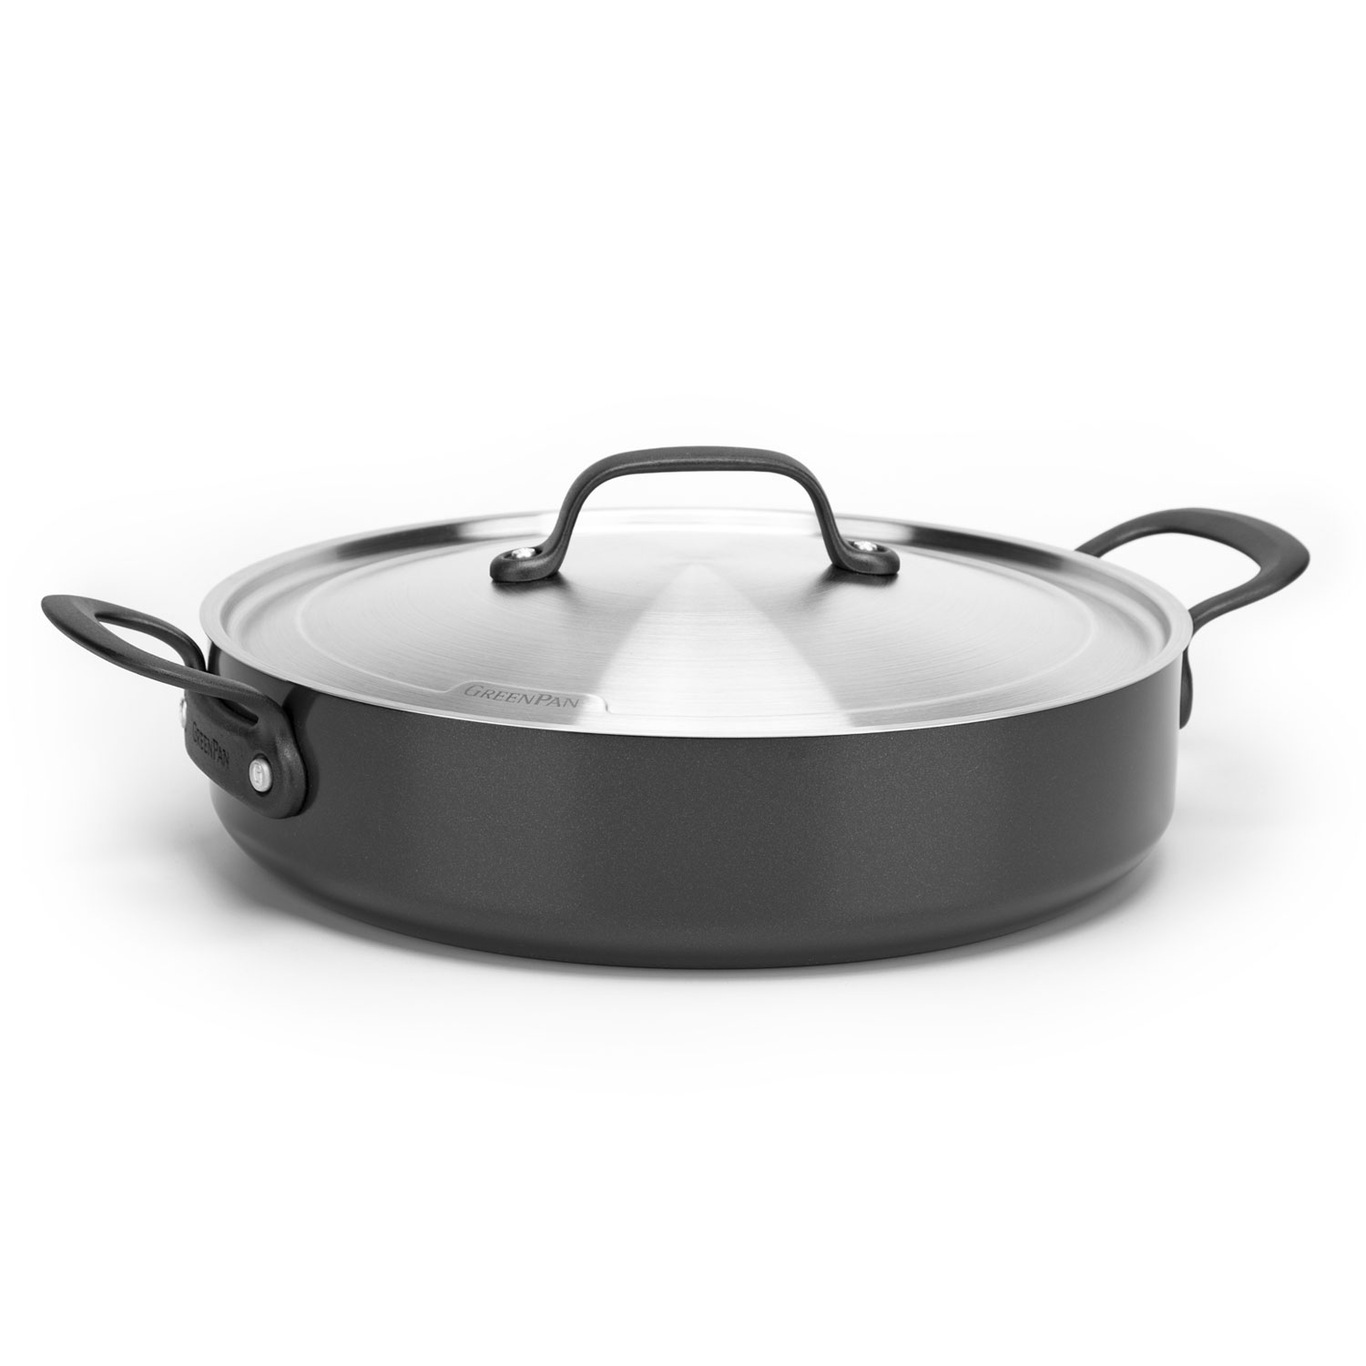 Craft Frying Pan With Lid 30 cm